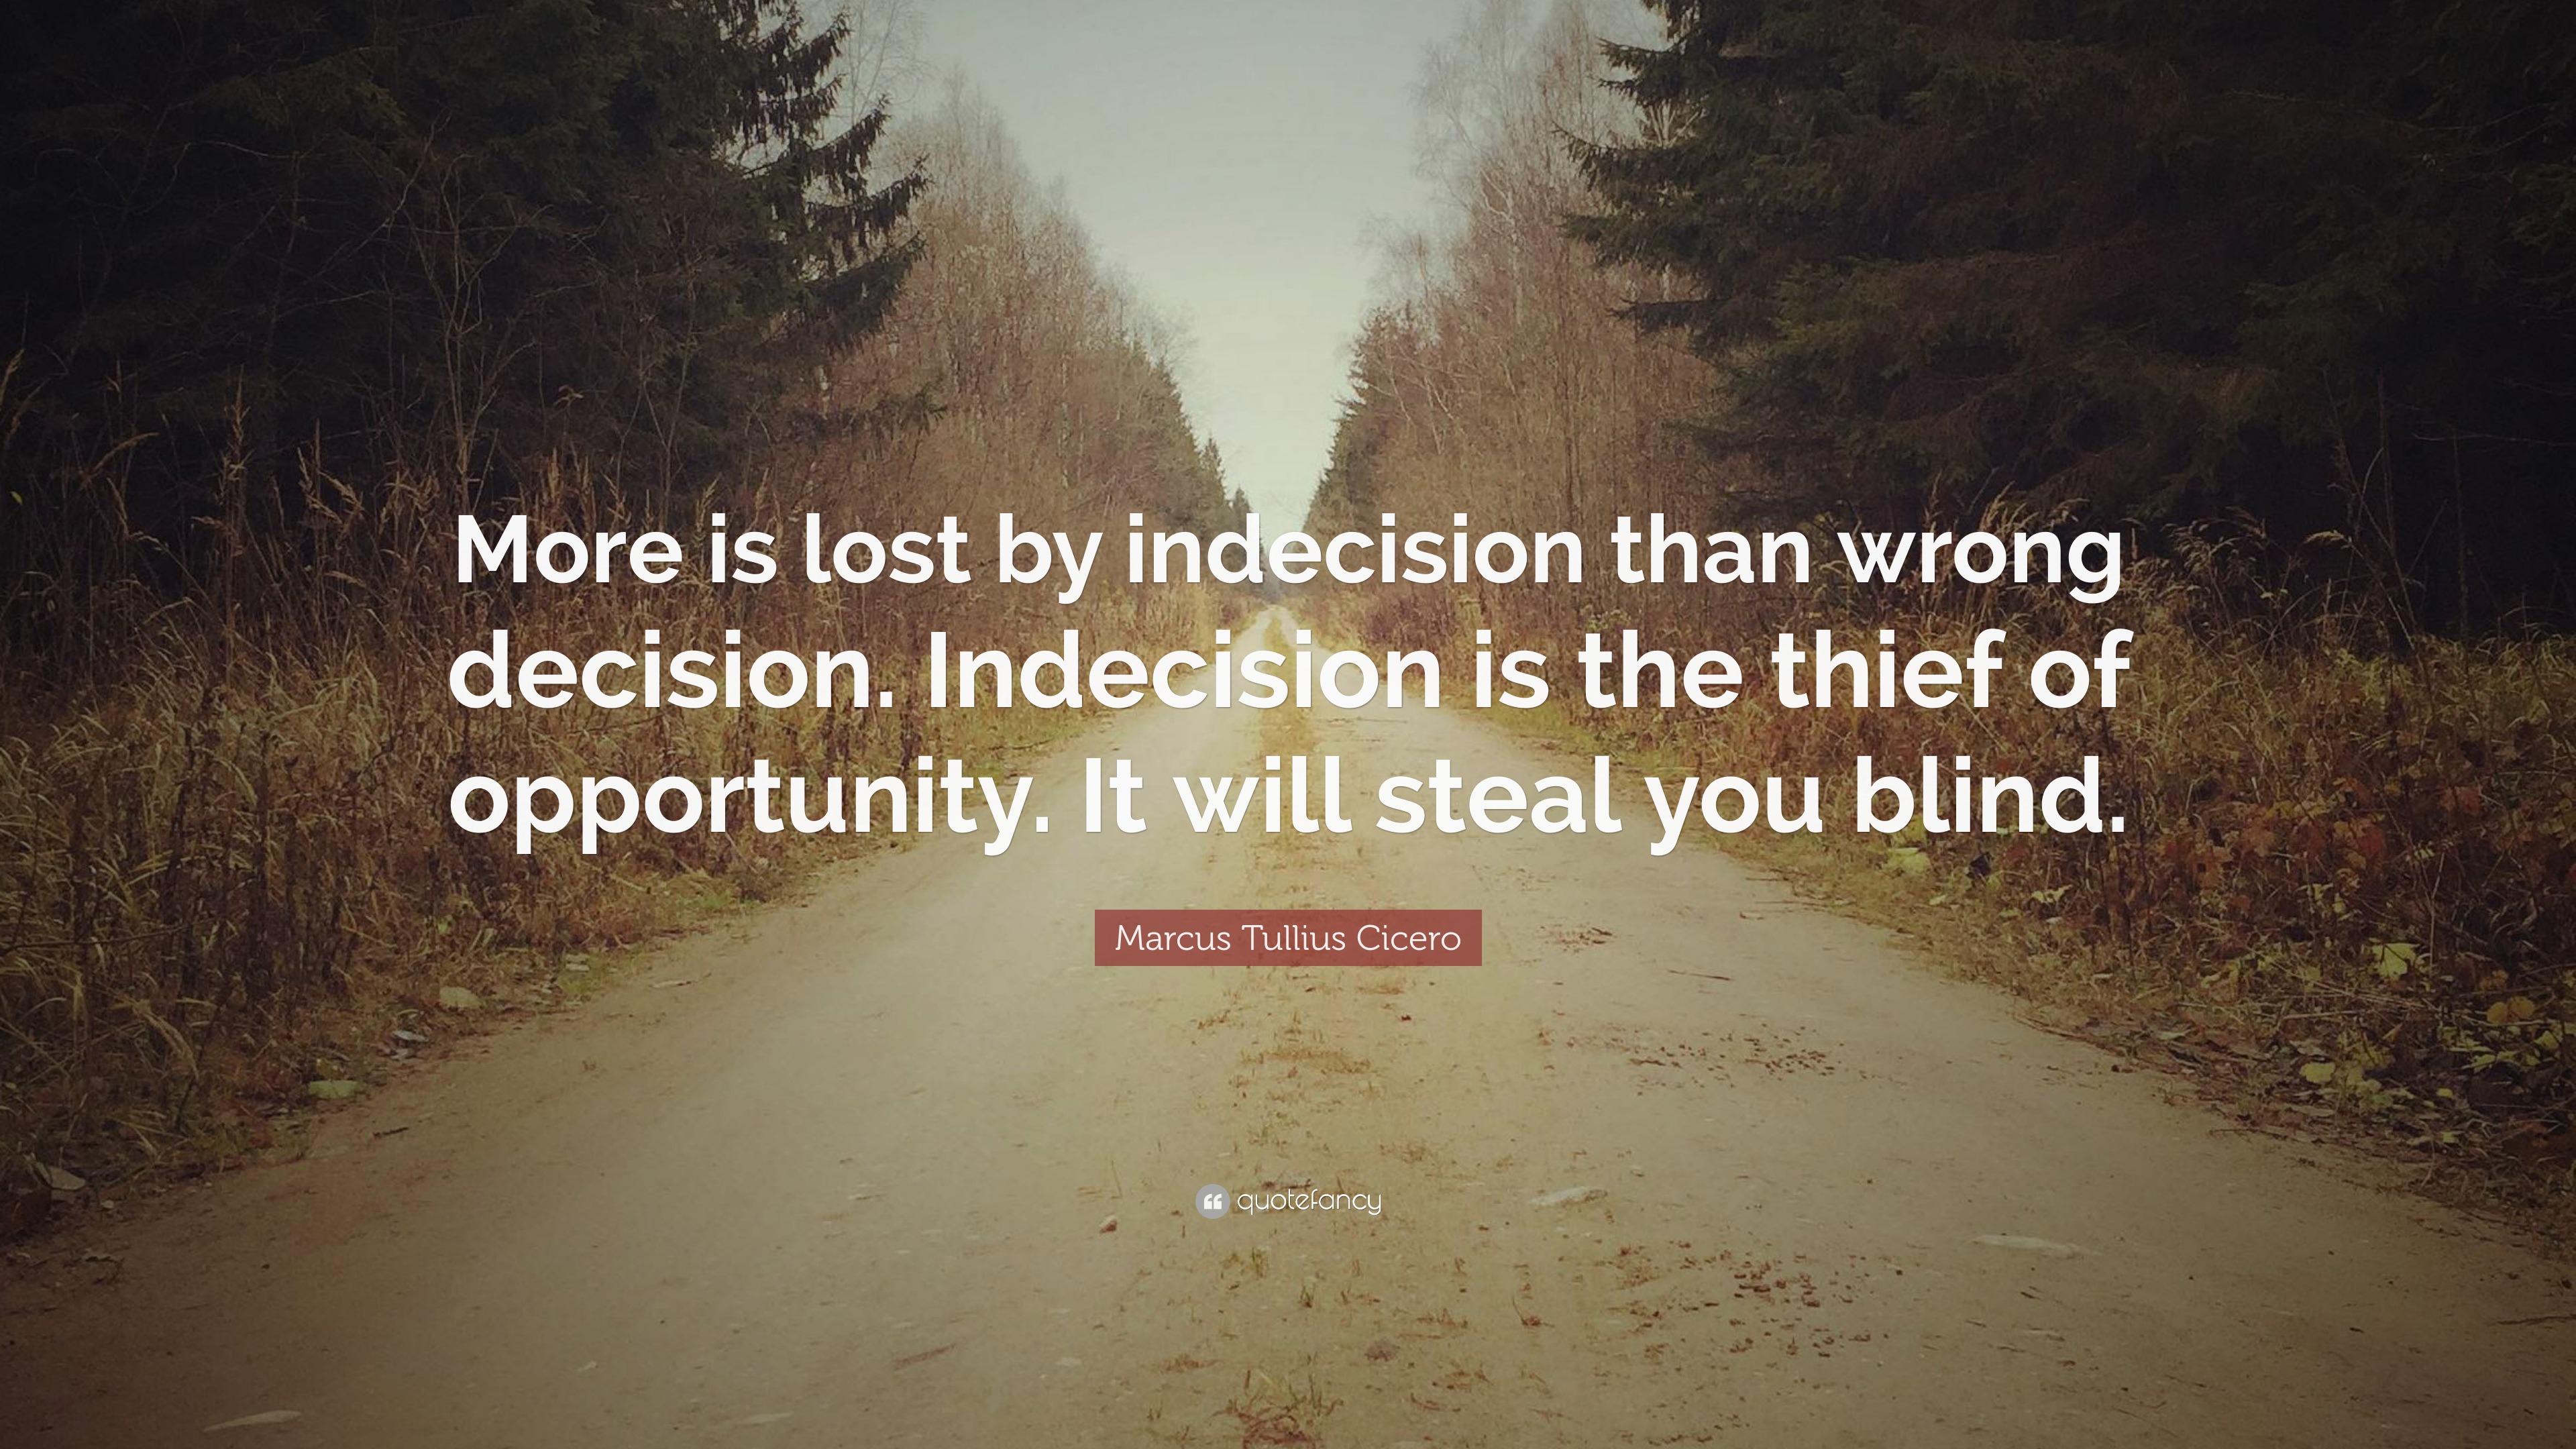 Marcus Tullius Cicero Quote “More is lost by indecision than wrong